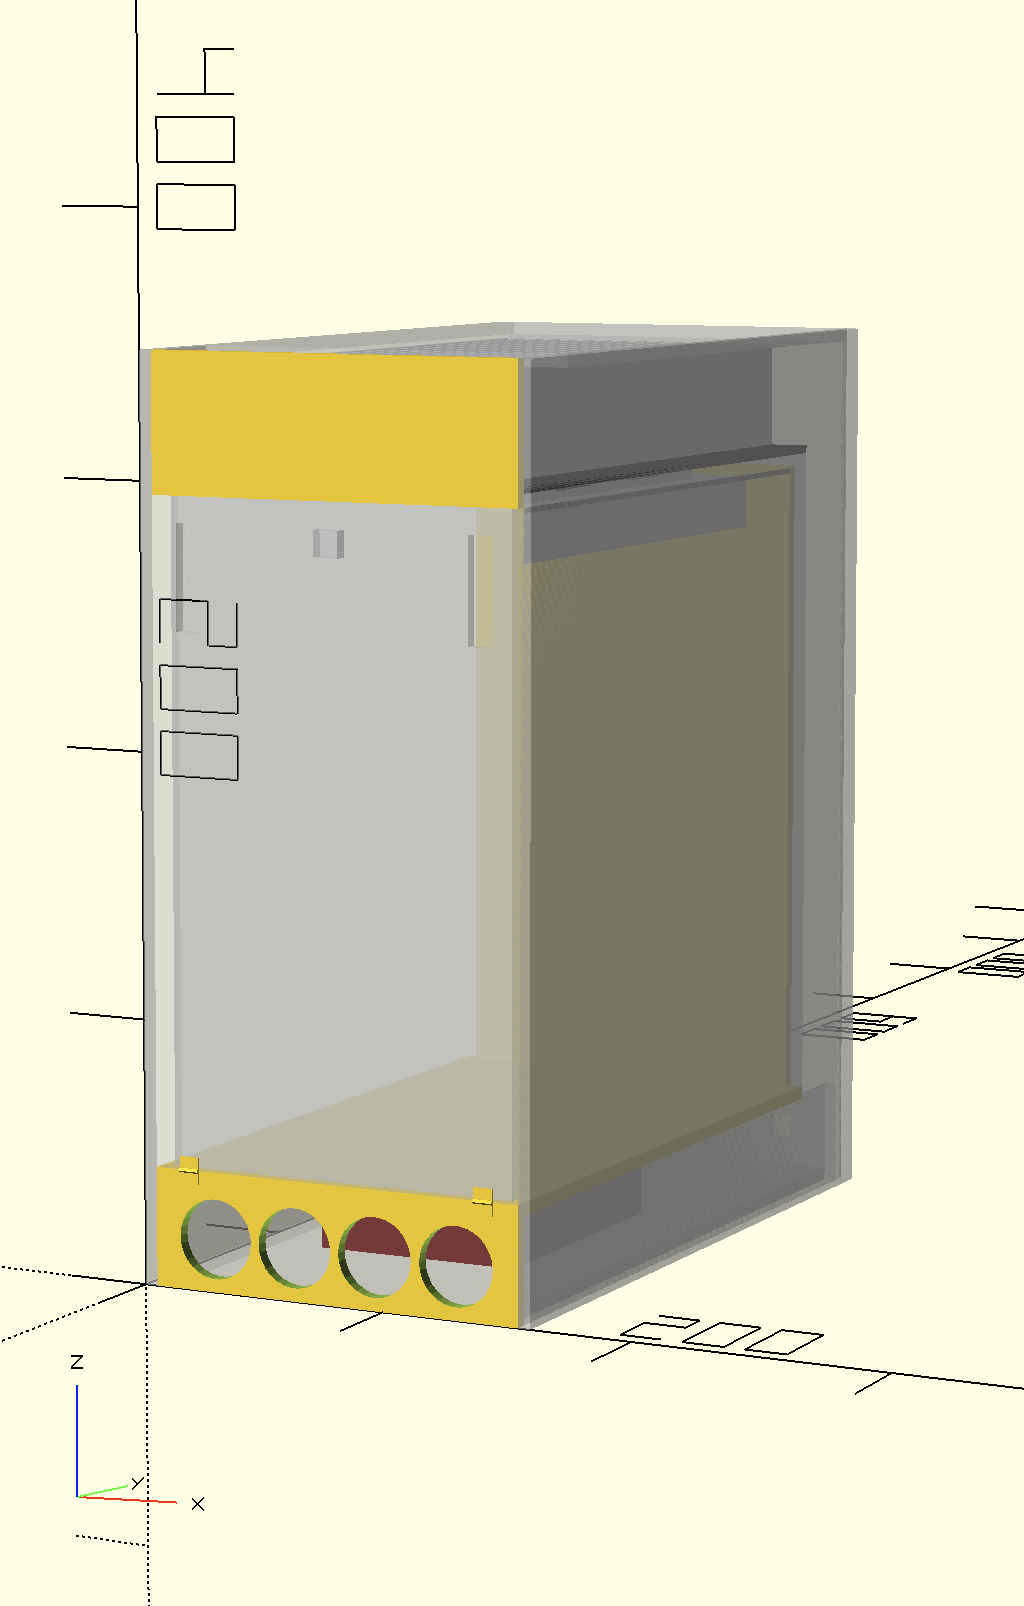 Image of OpenSCAD